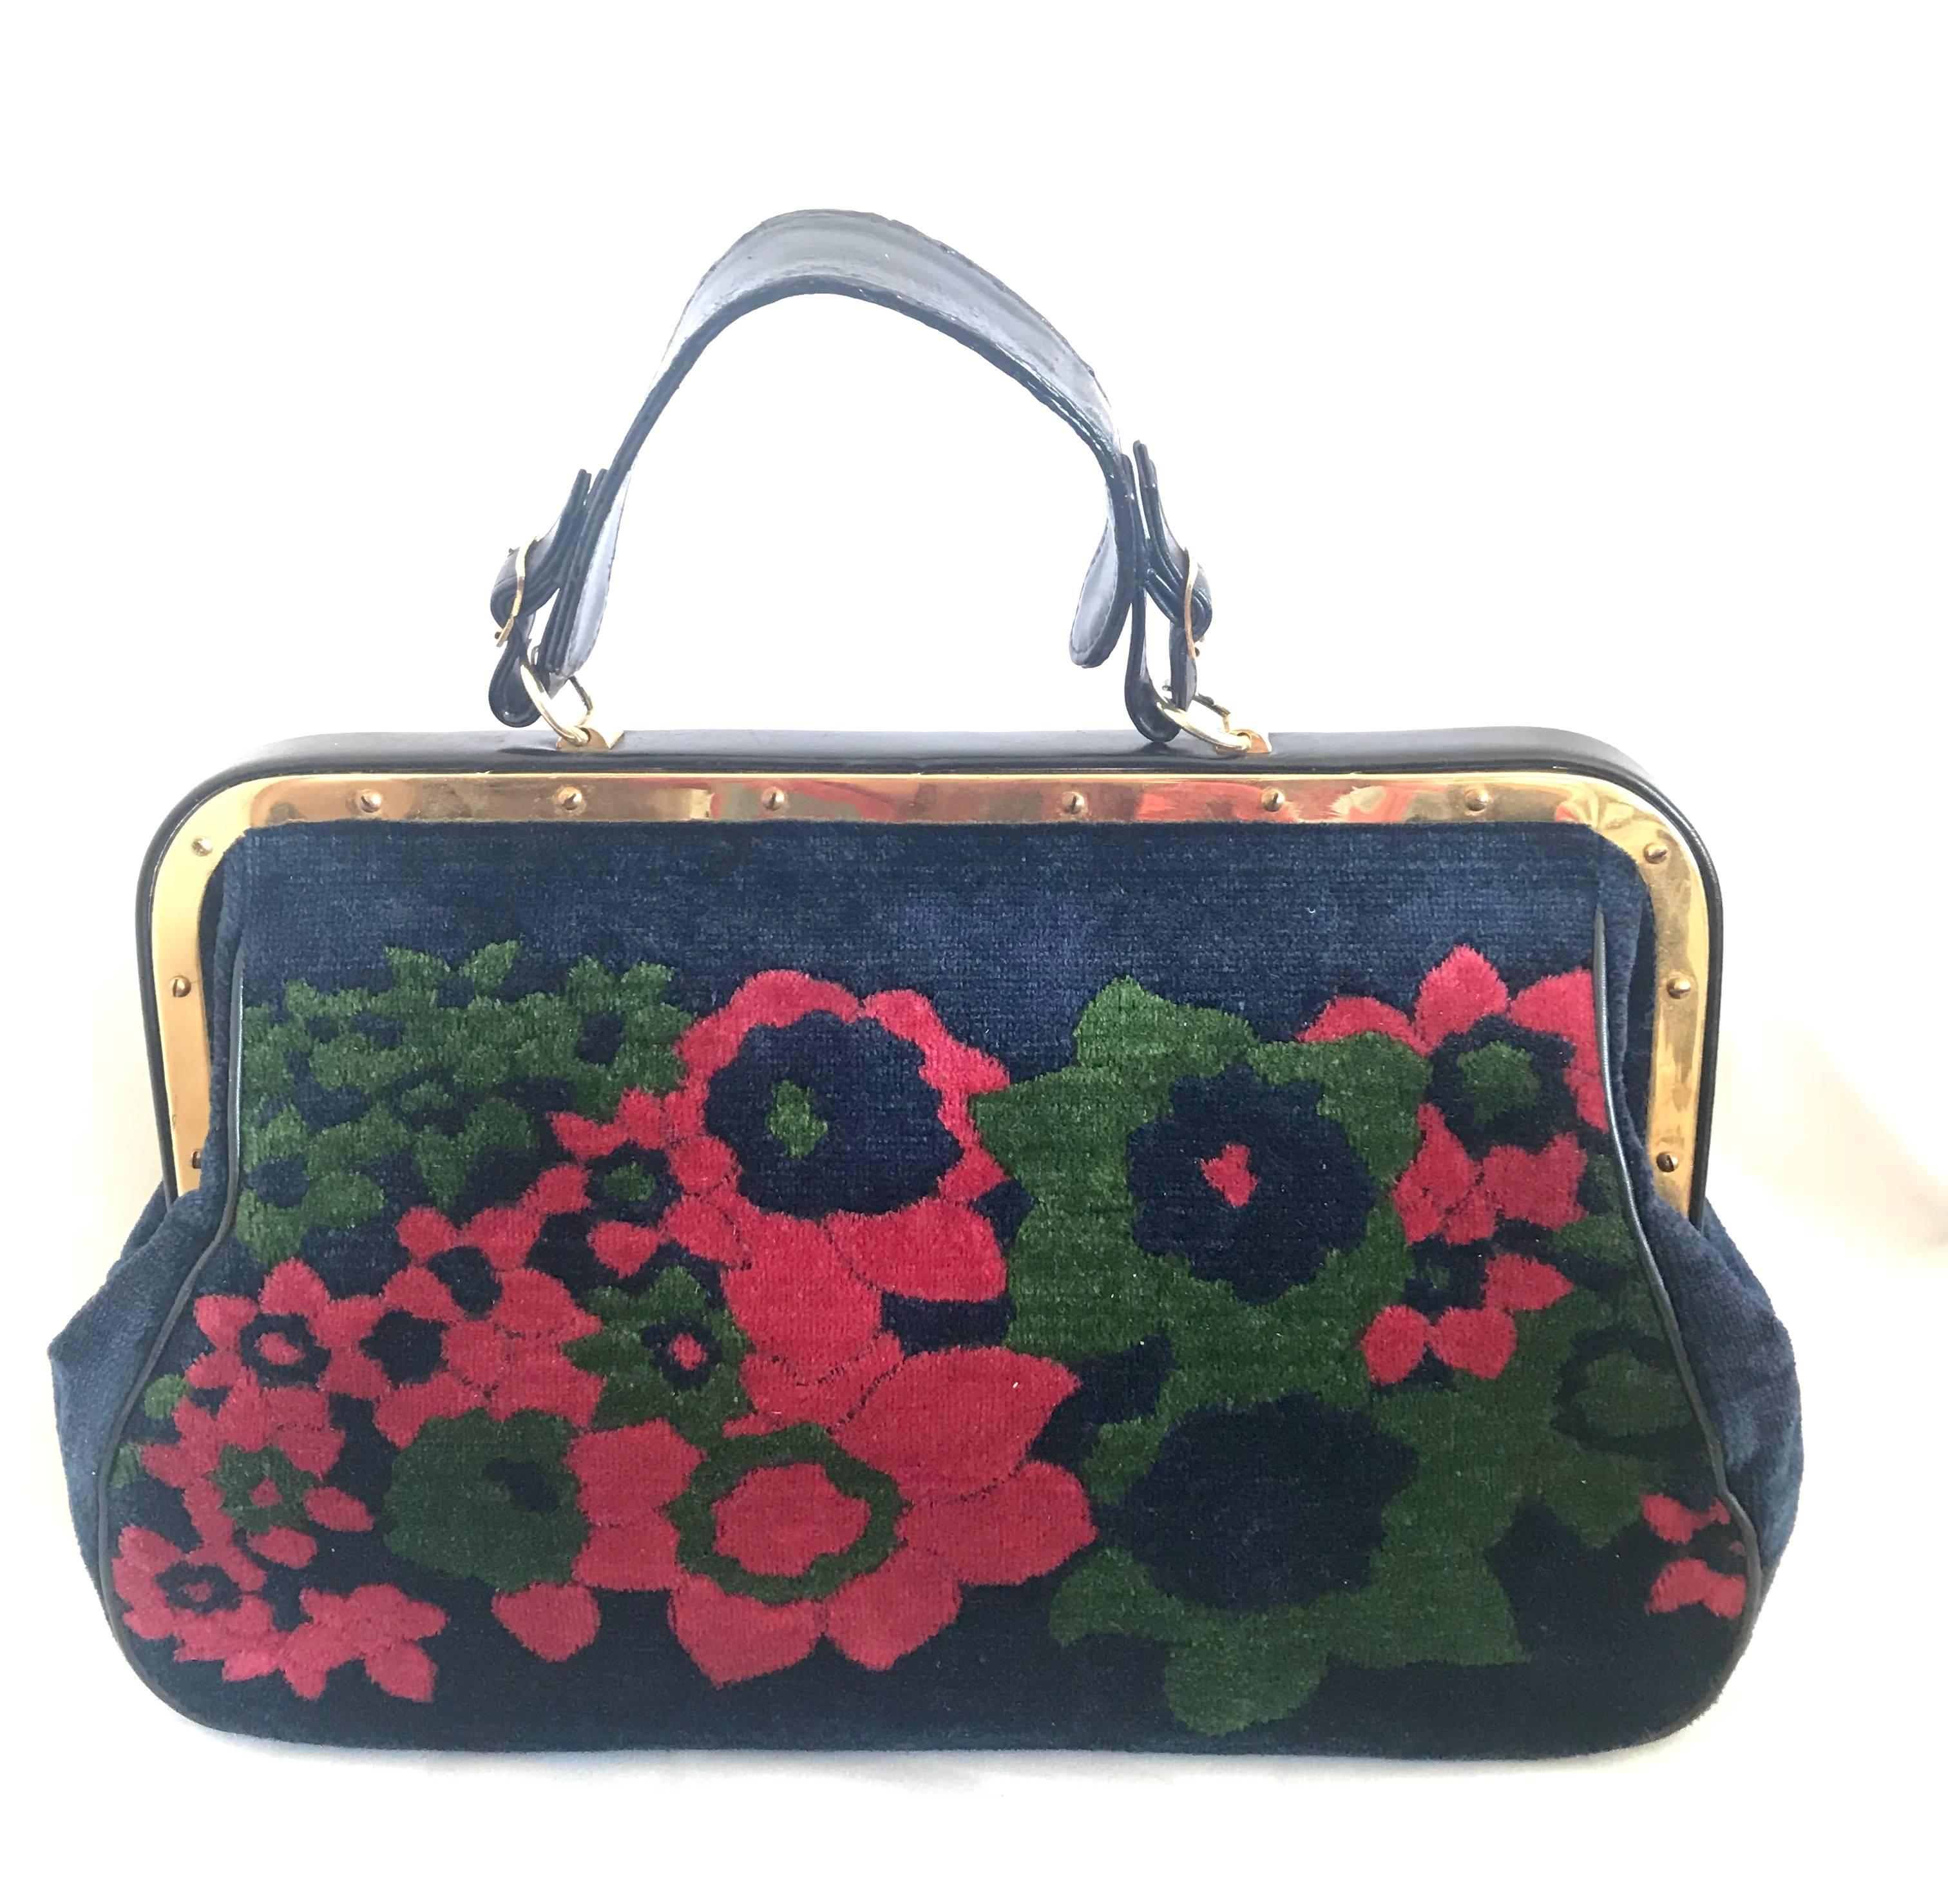 1970's, 80's vintage Roberta di Camerino red, green, and navy velvet and leather doctor bag with flower weaving and gold charm. Rare masterpiece.       

For all Roberta vintage lovers, this purse is the one for you!
Introducing one of the rarest